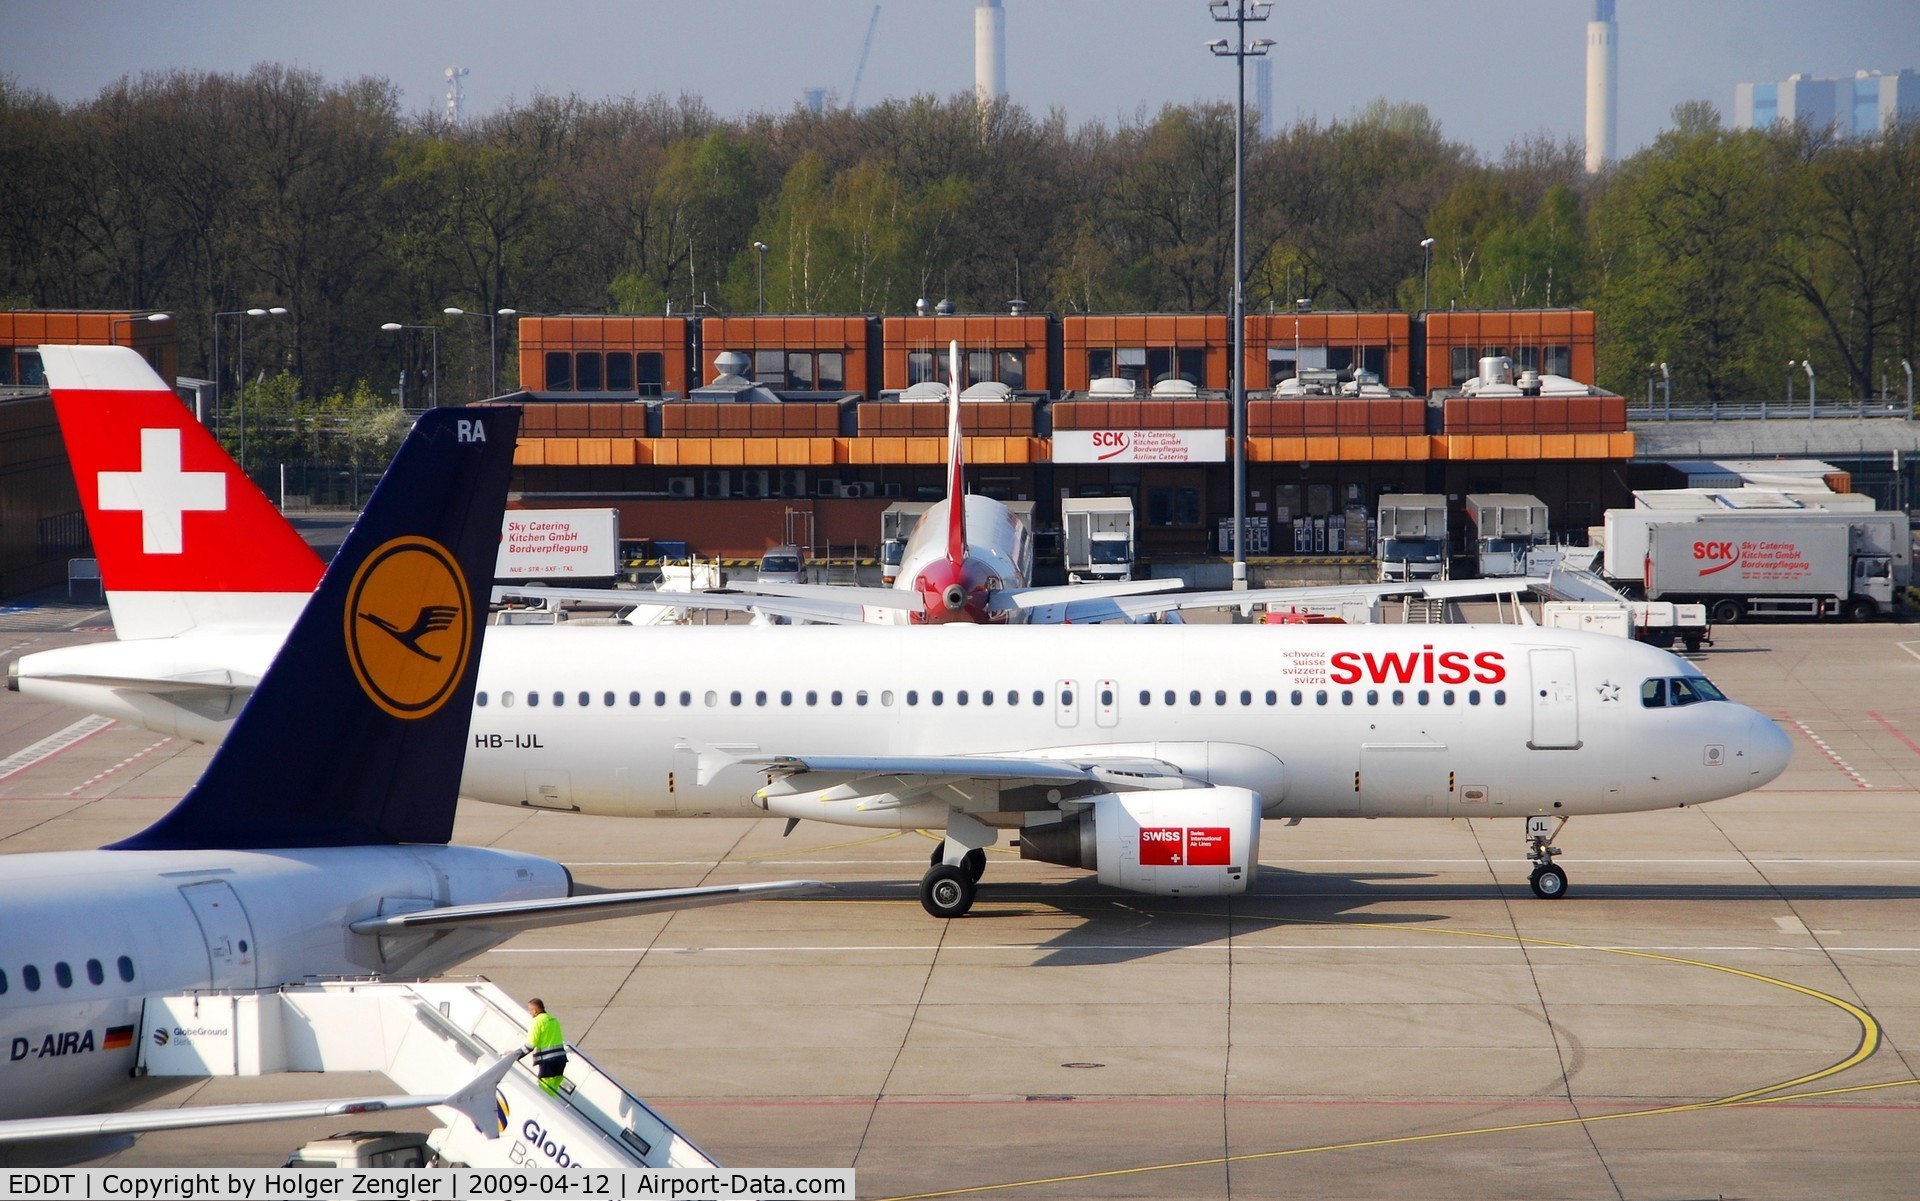 Tegel International Airport (closing in 2011), Berlin Germany (EDDT) - Some go, some stay....